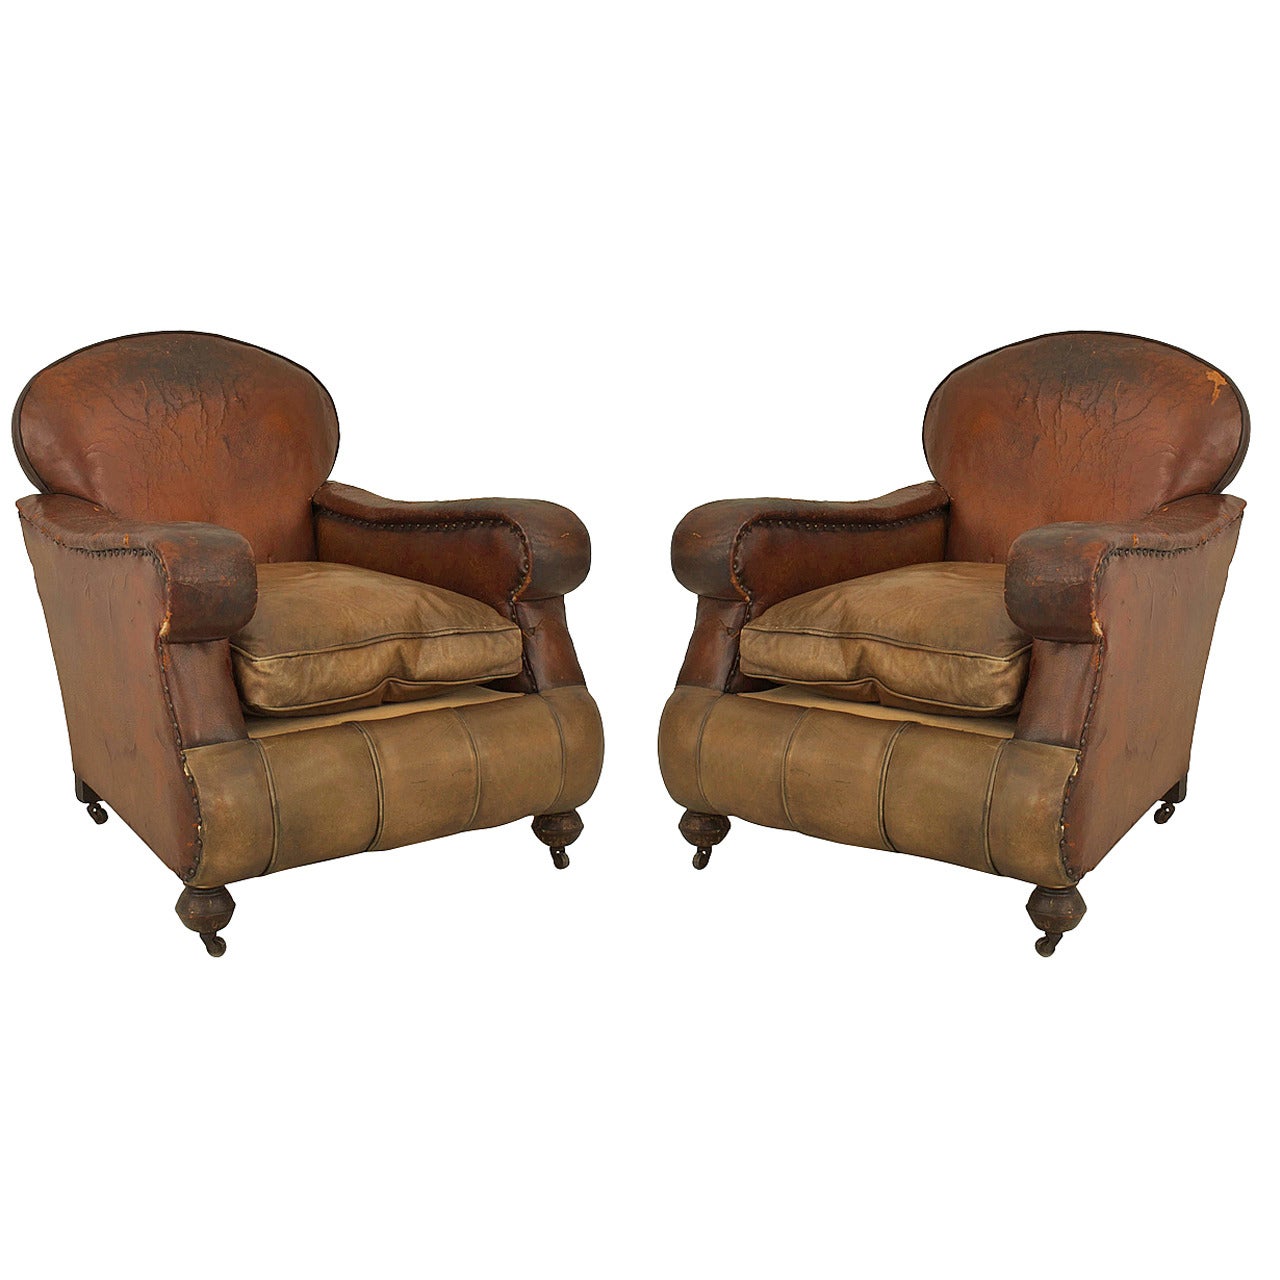 Pair of 19th Century English Oversized Brown Leather Club Chairs